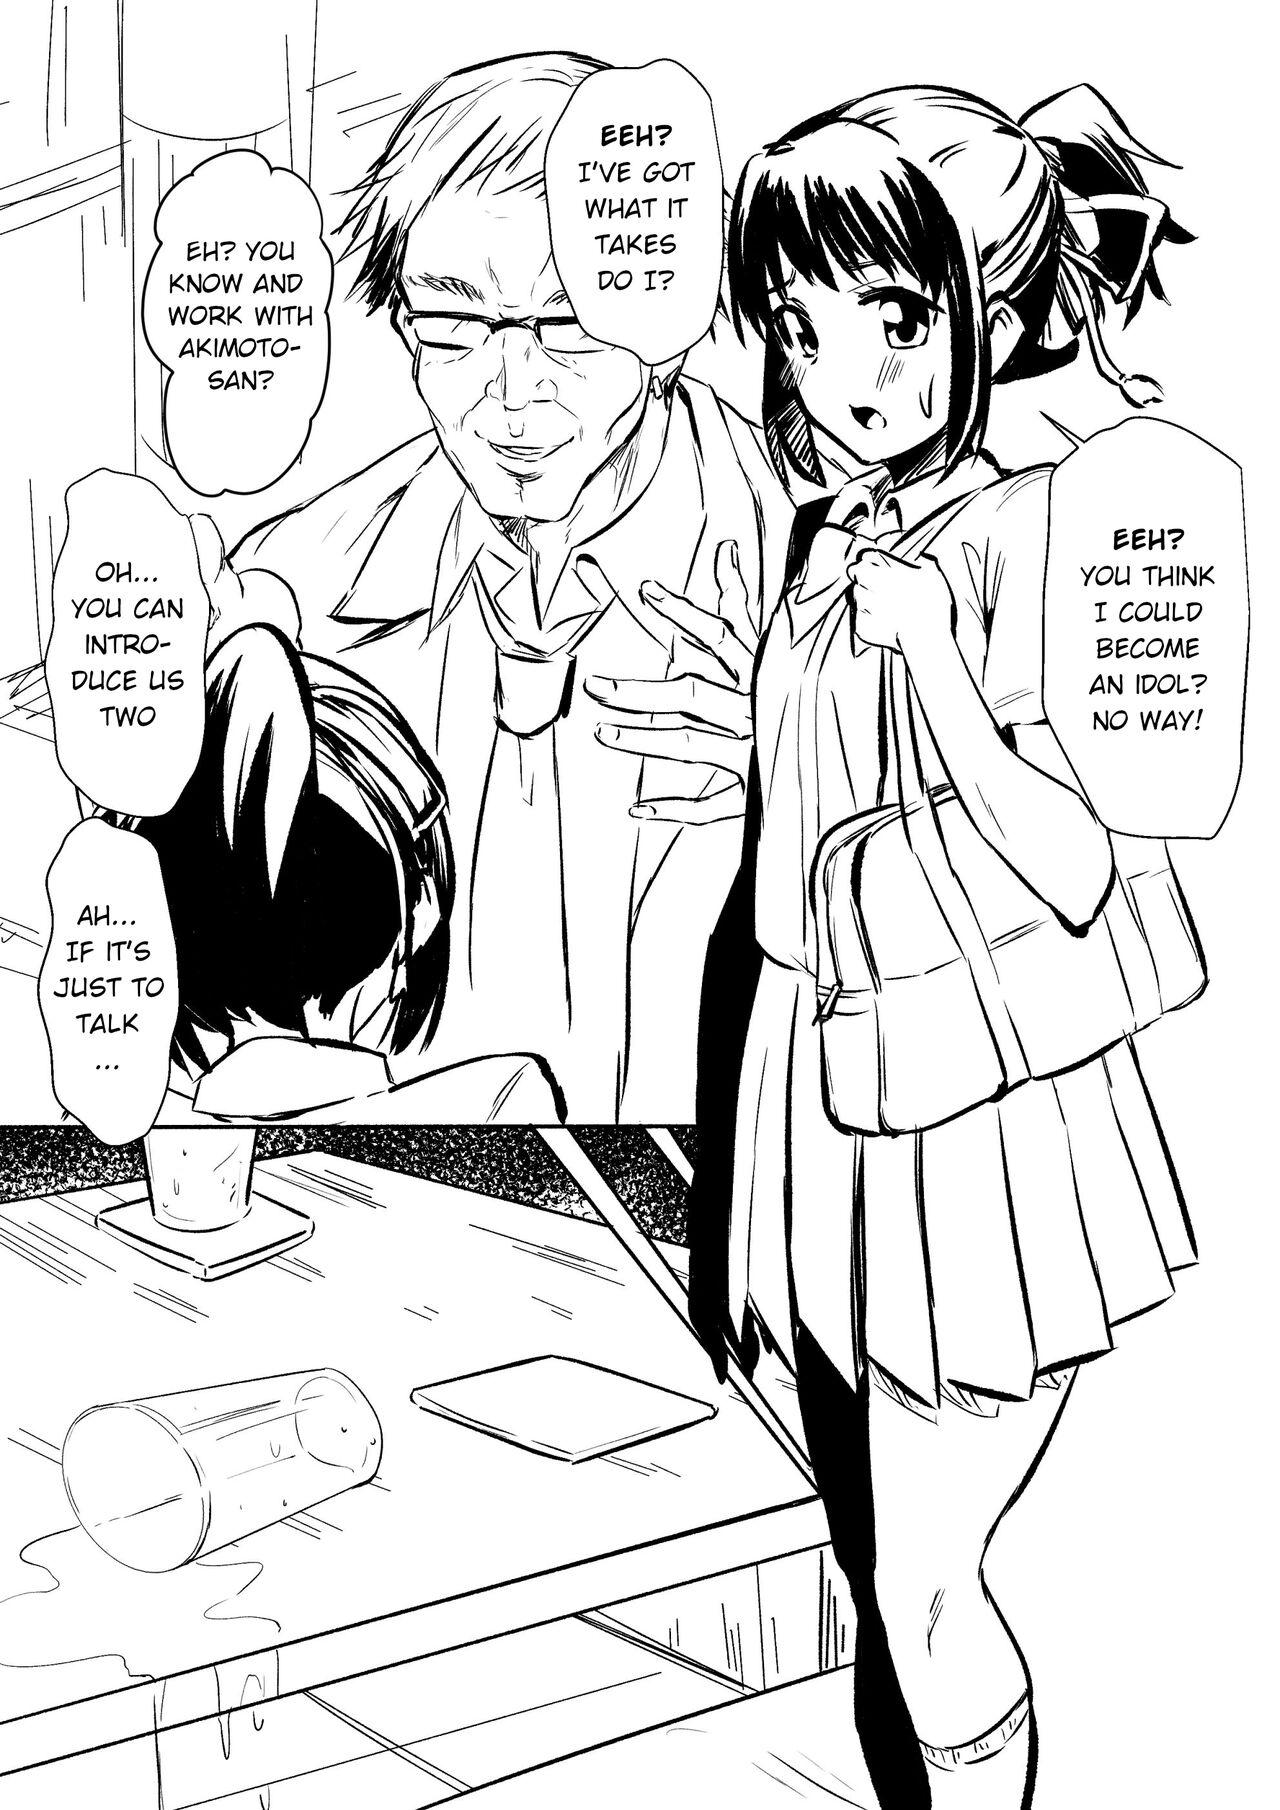 Interview What was your name again? - Kimi no na wa - What's your name - Kimi no na wa. Glasses - Page 1